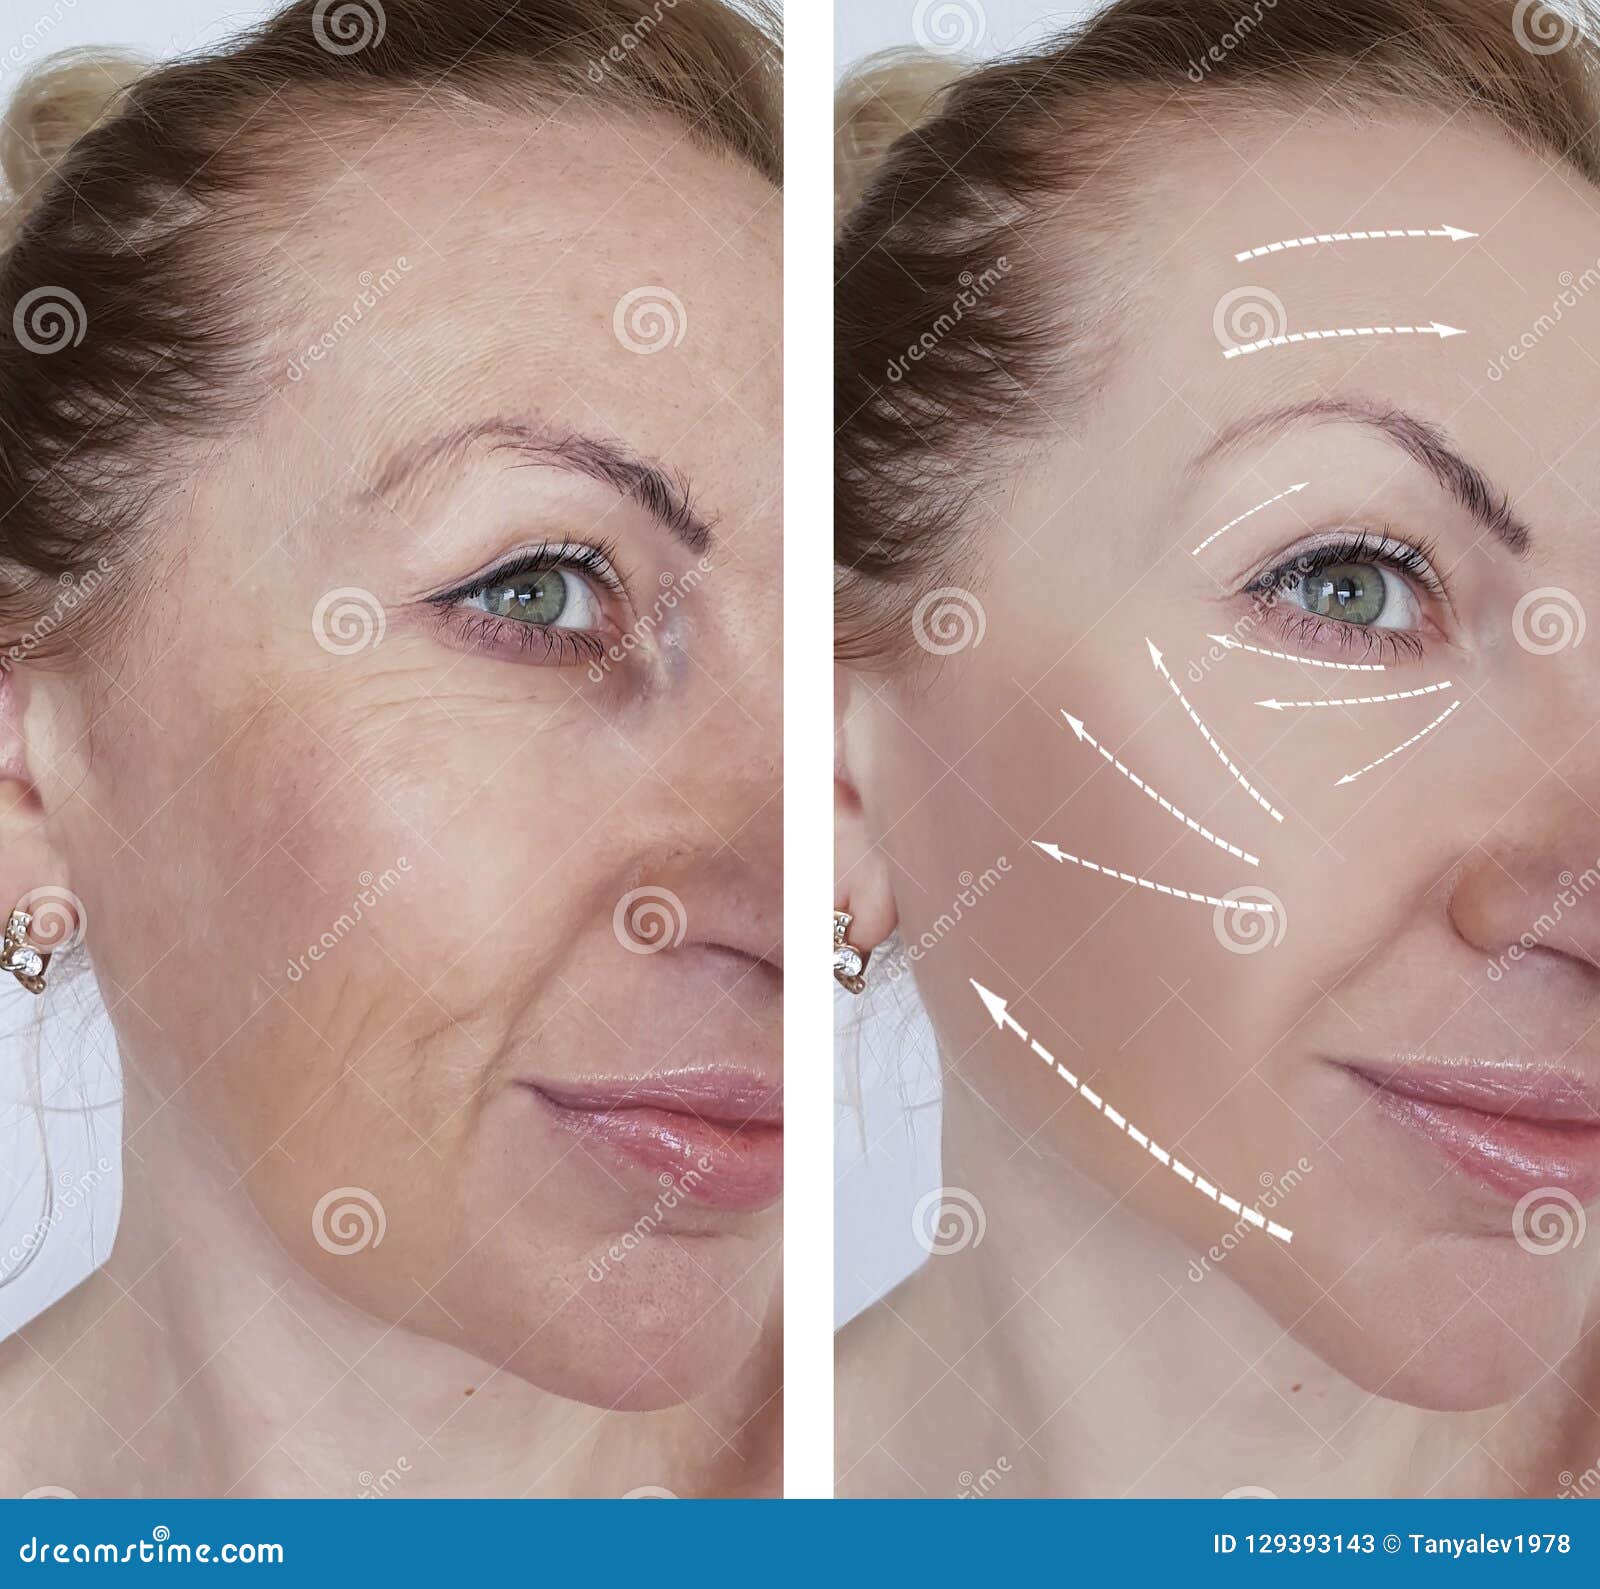 woman wrinkles skin difference antiaging contours before and after regeneration